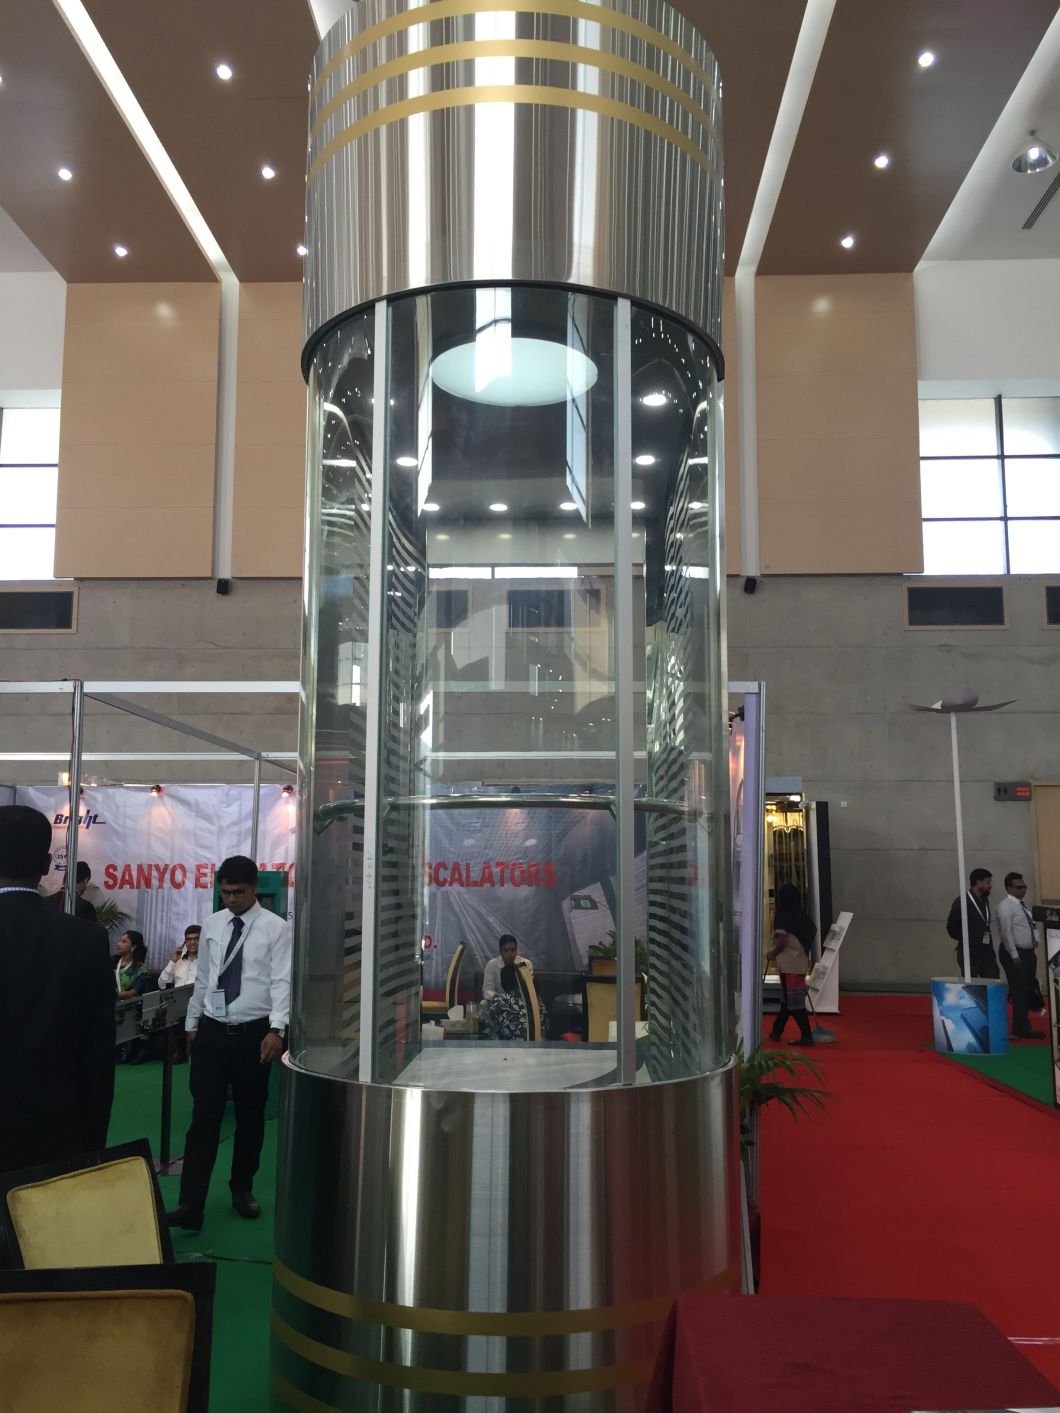 Capsule lift high quality full glass sightseeing panoramic elevator